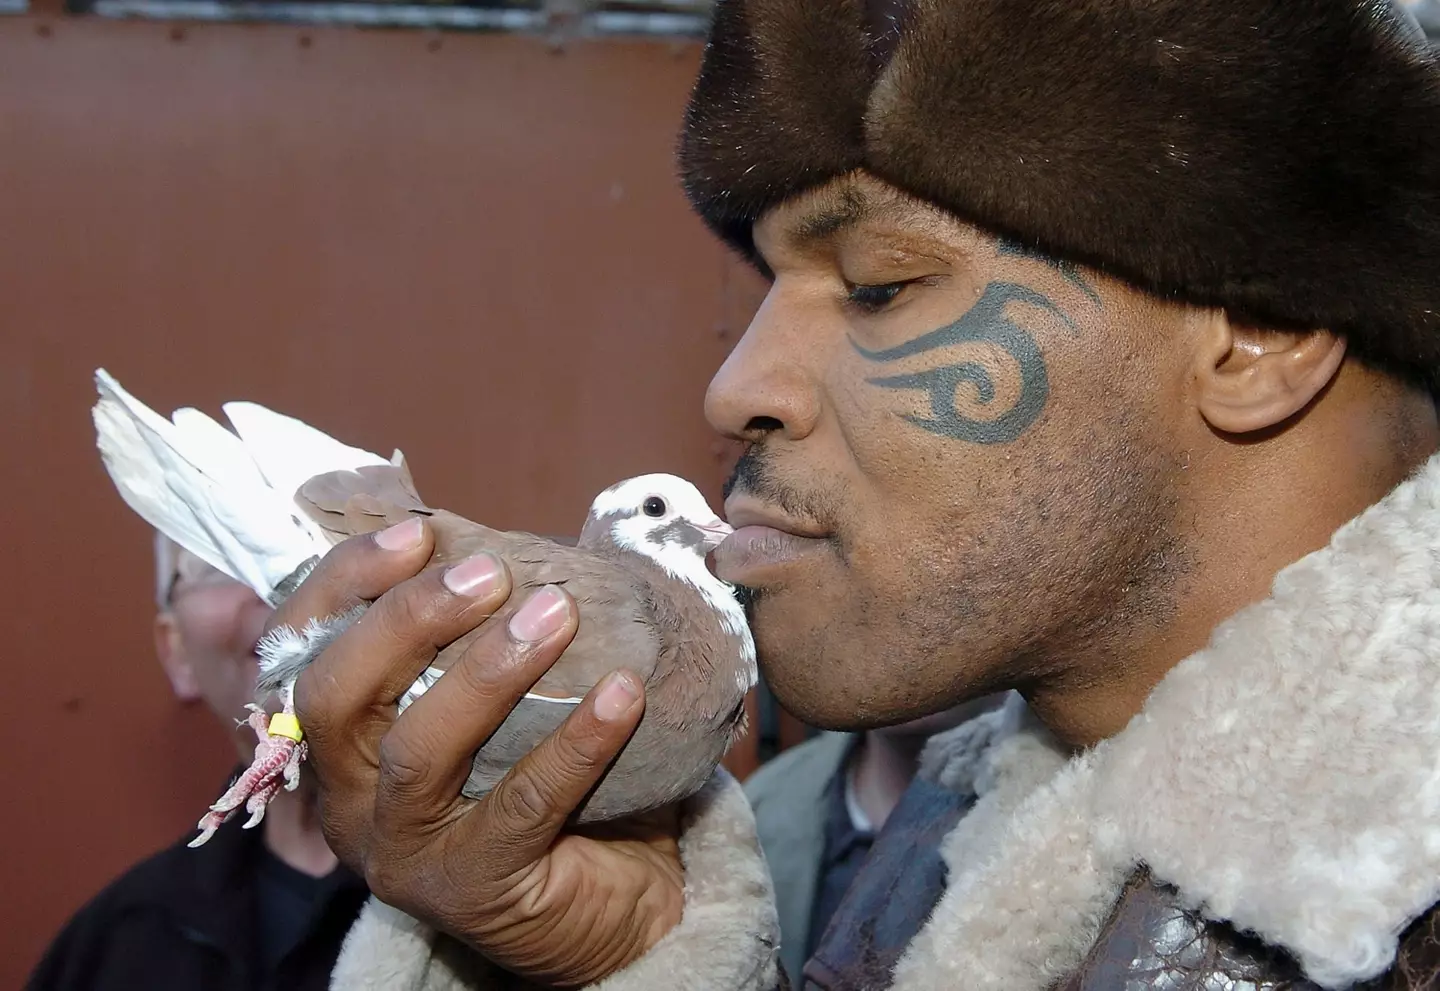 The 55-year-old with one of his pigeons.